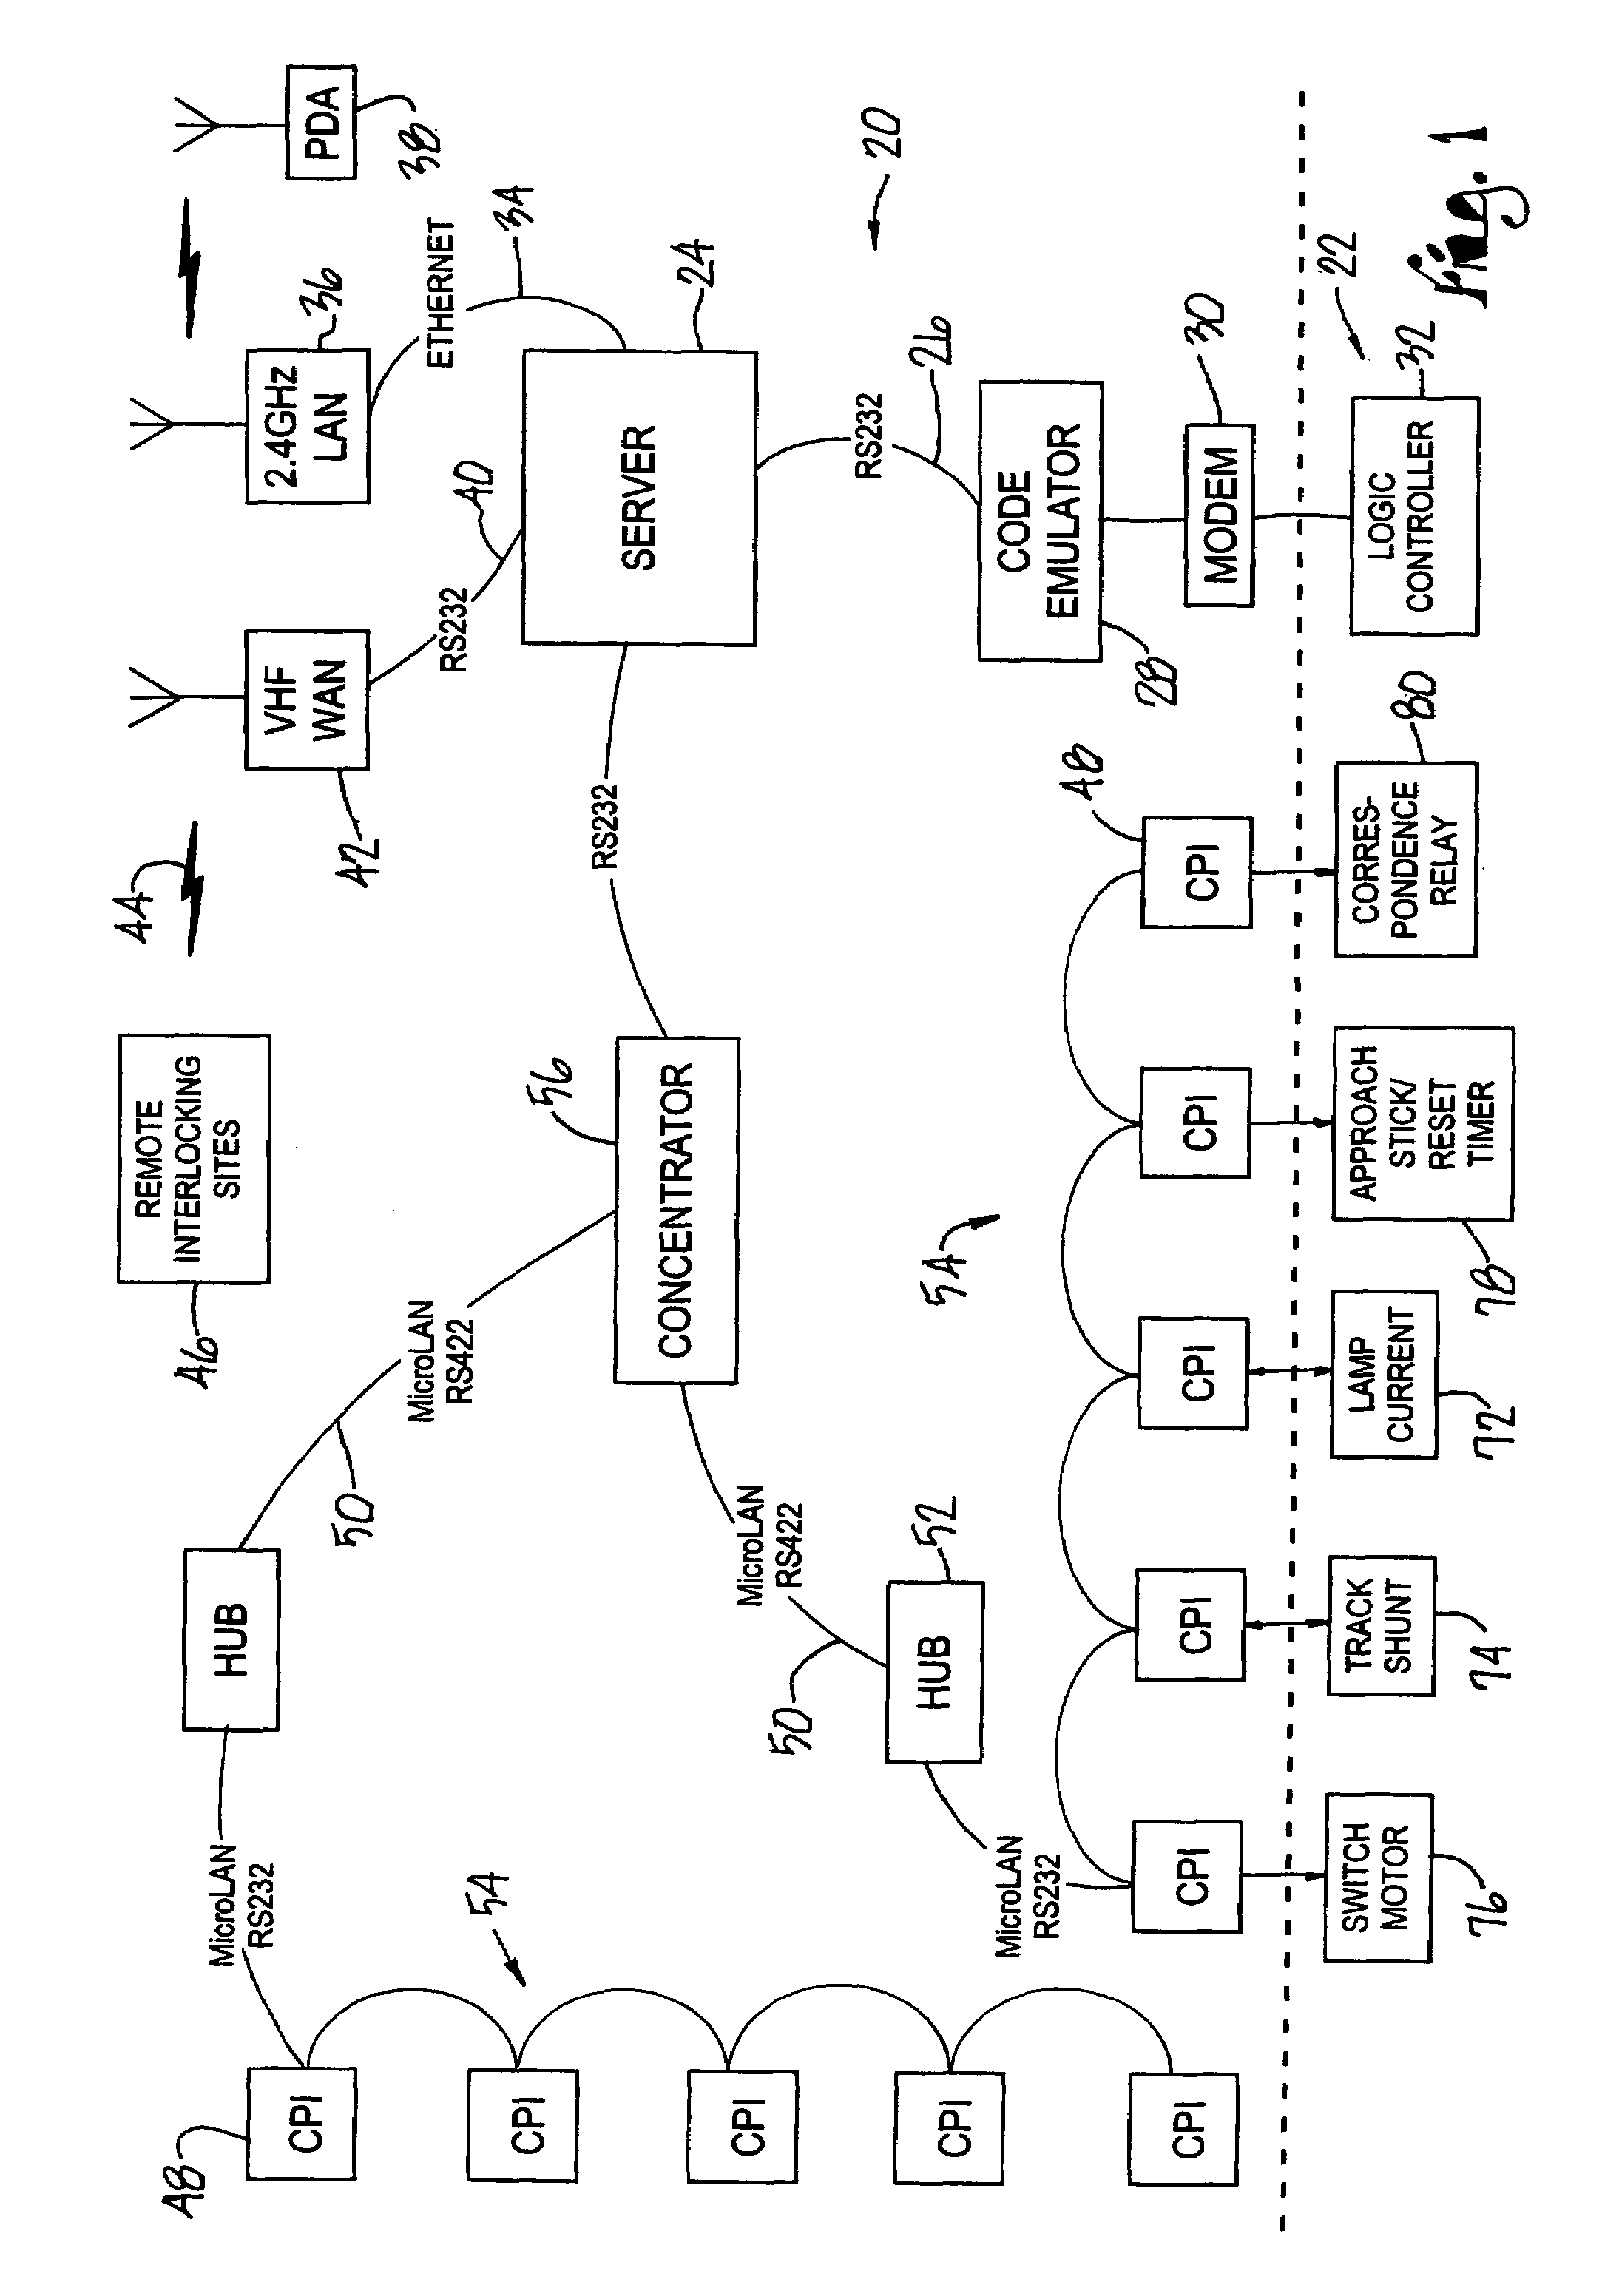 Method and apparatus for automatically testing a railroad interlocking